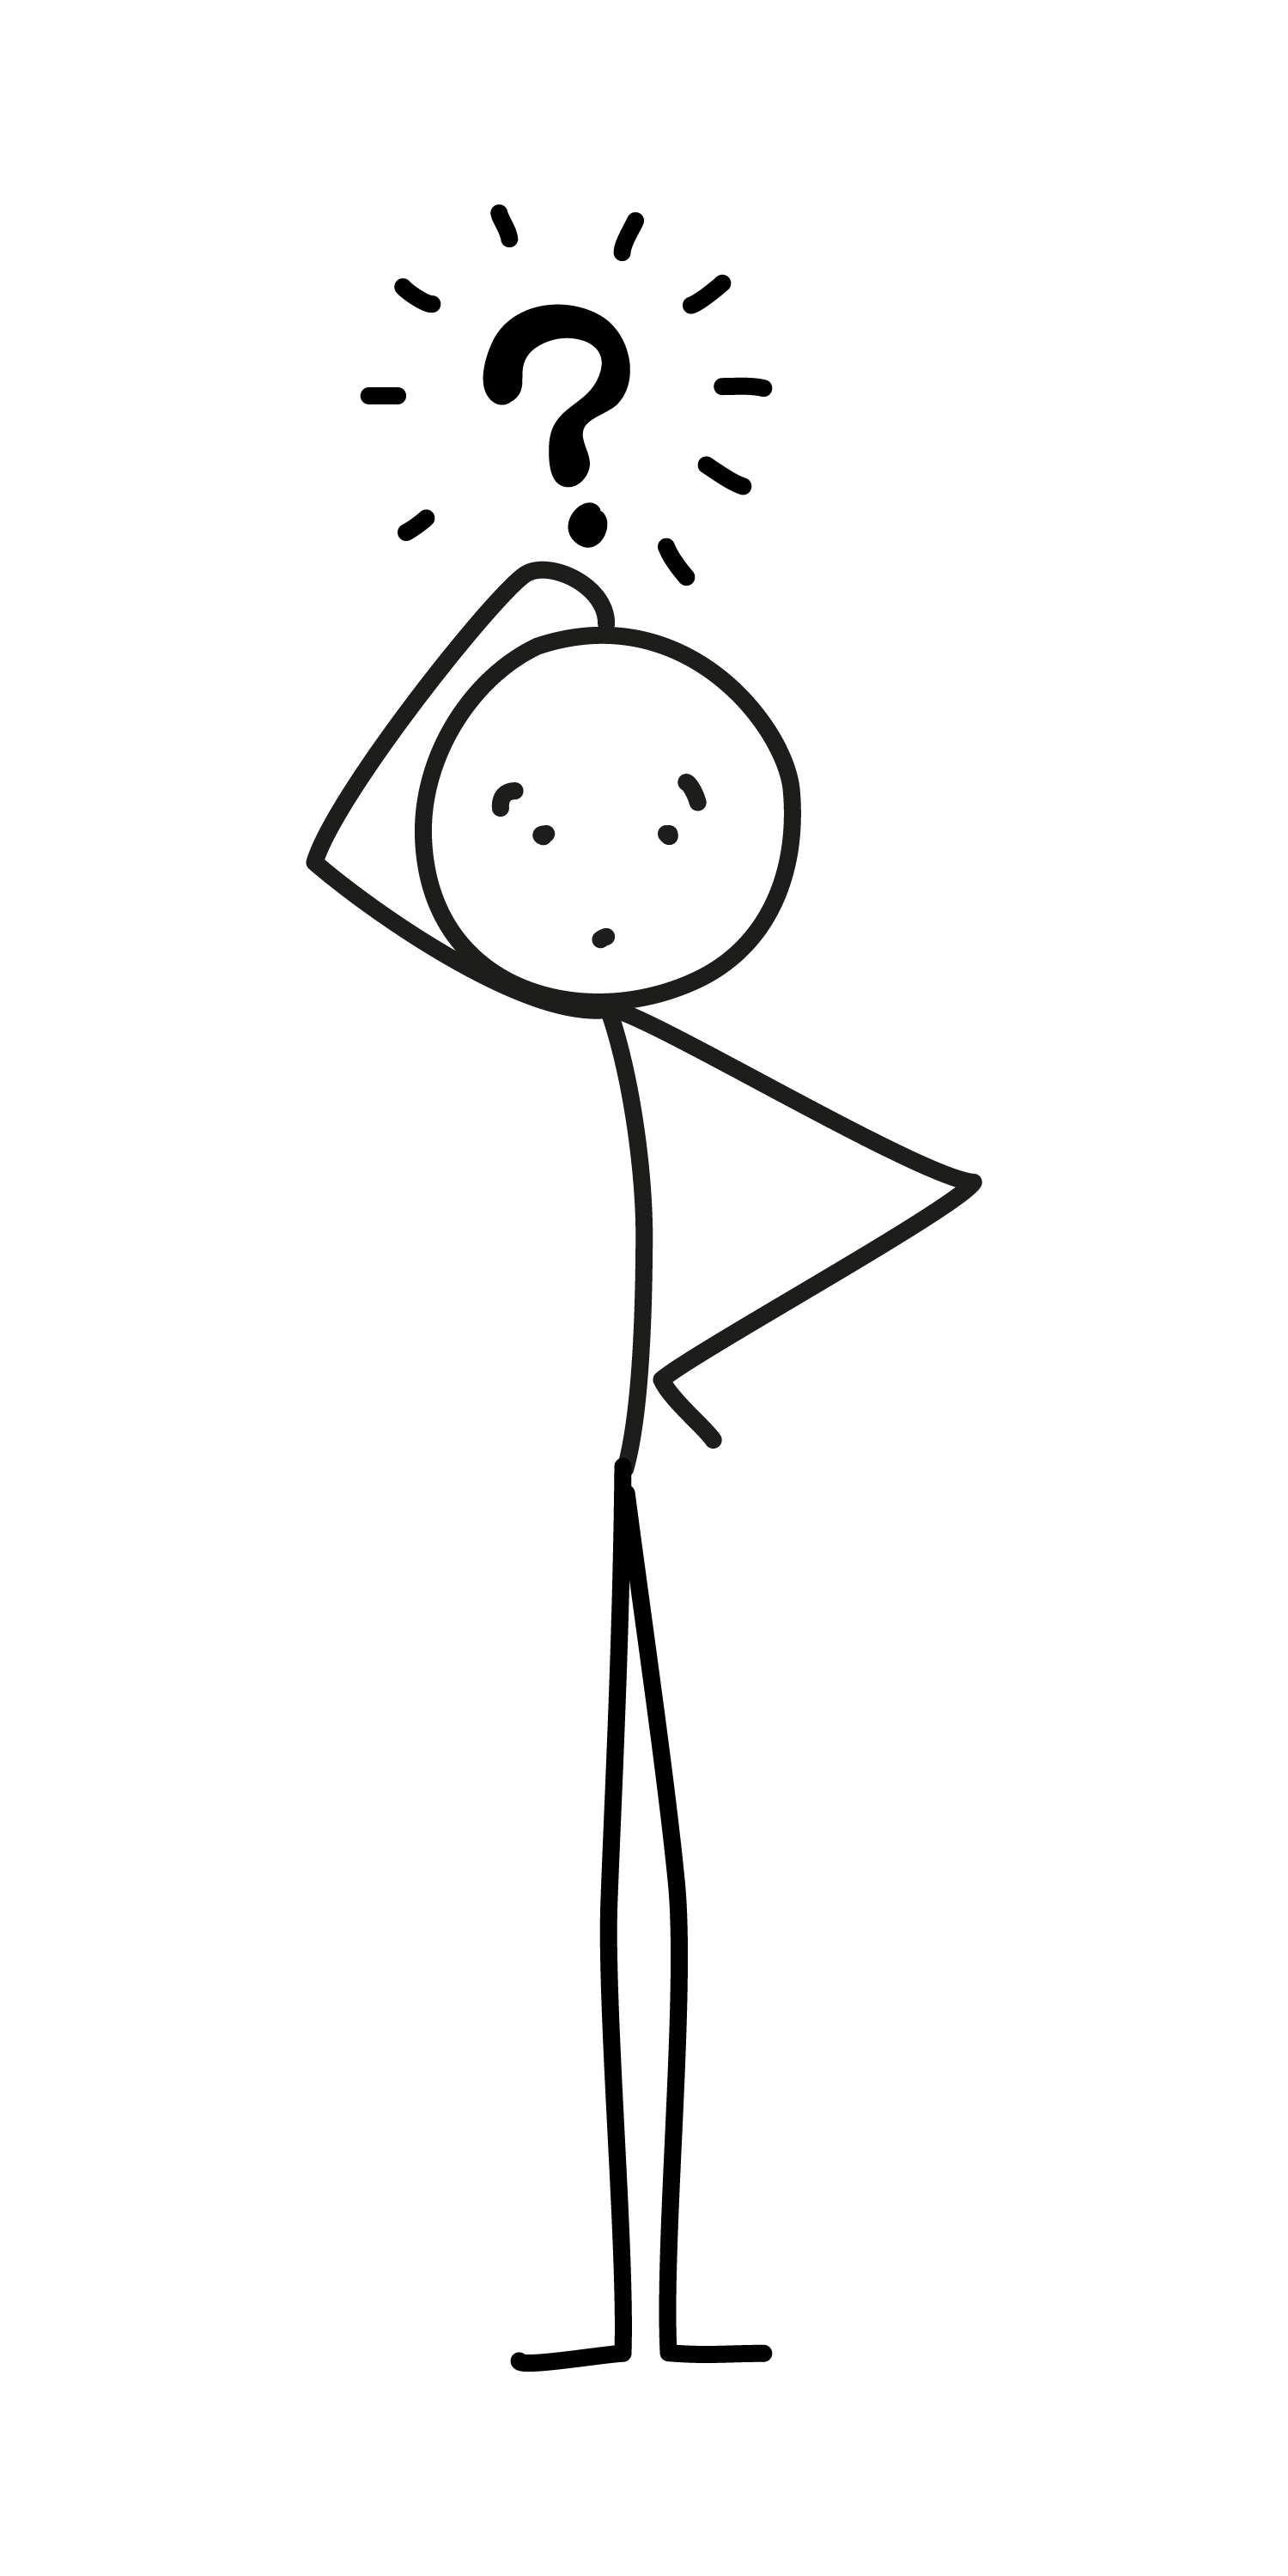 Stick Figure with Question Mark Over Head.jpg